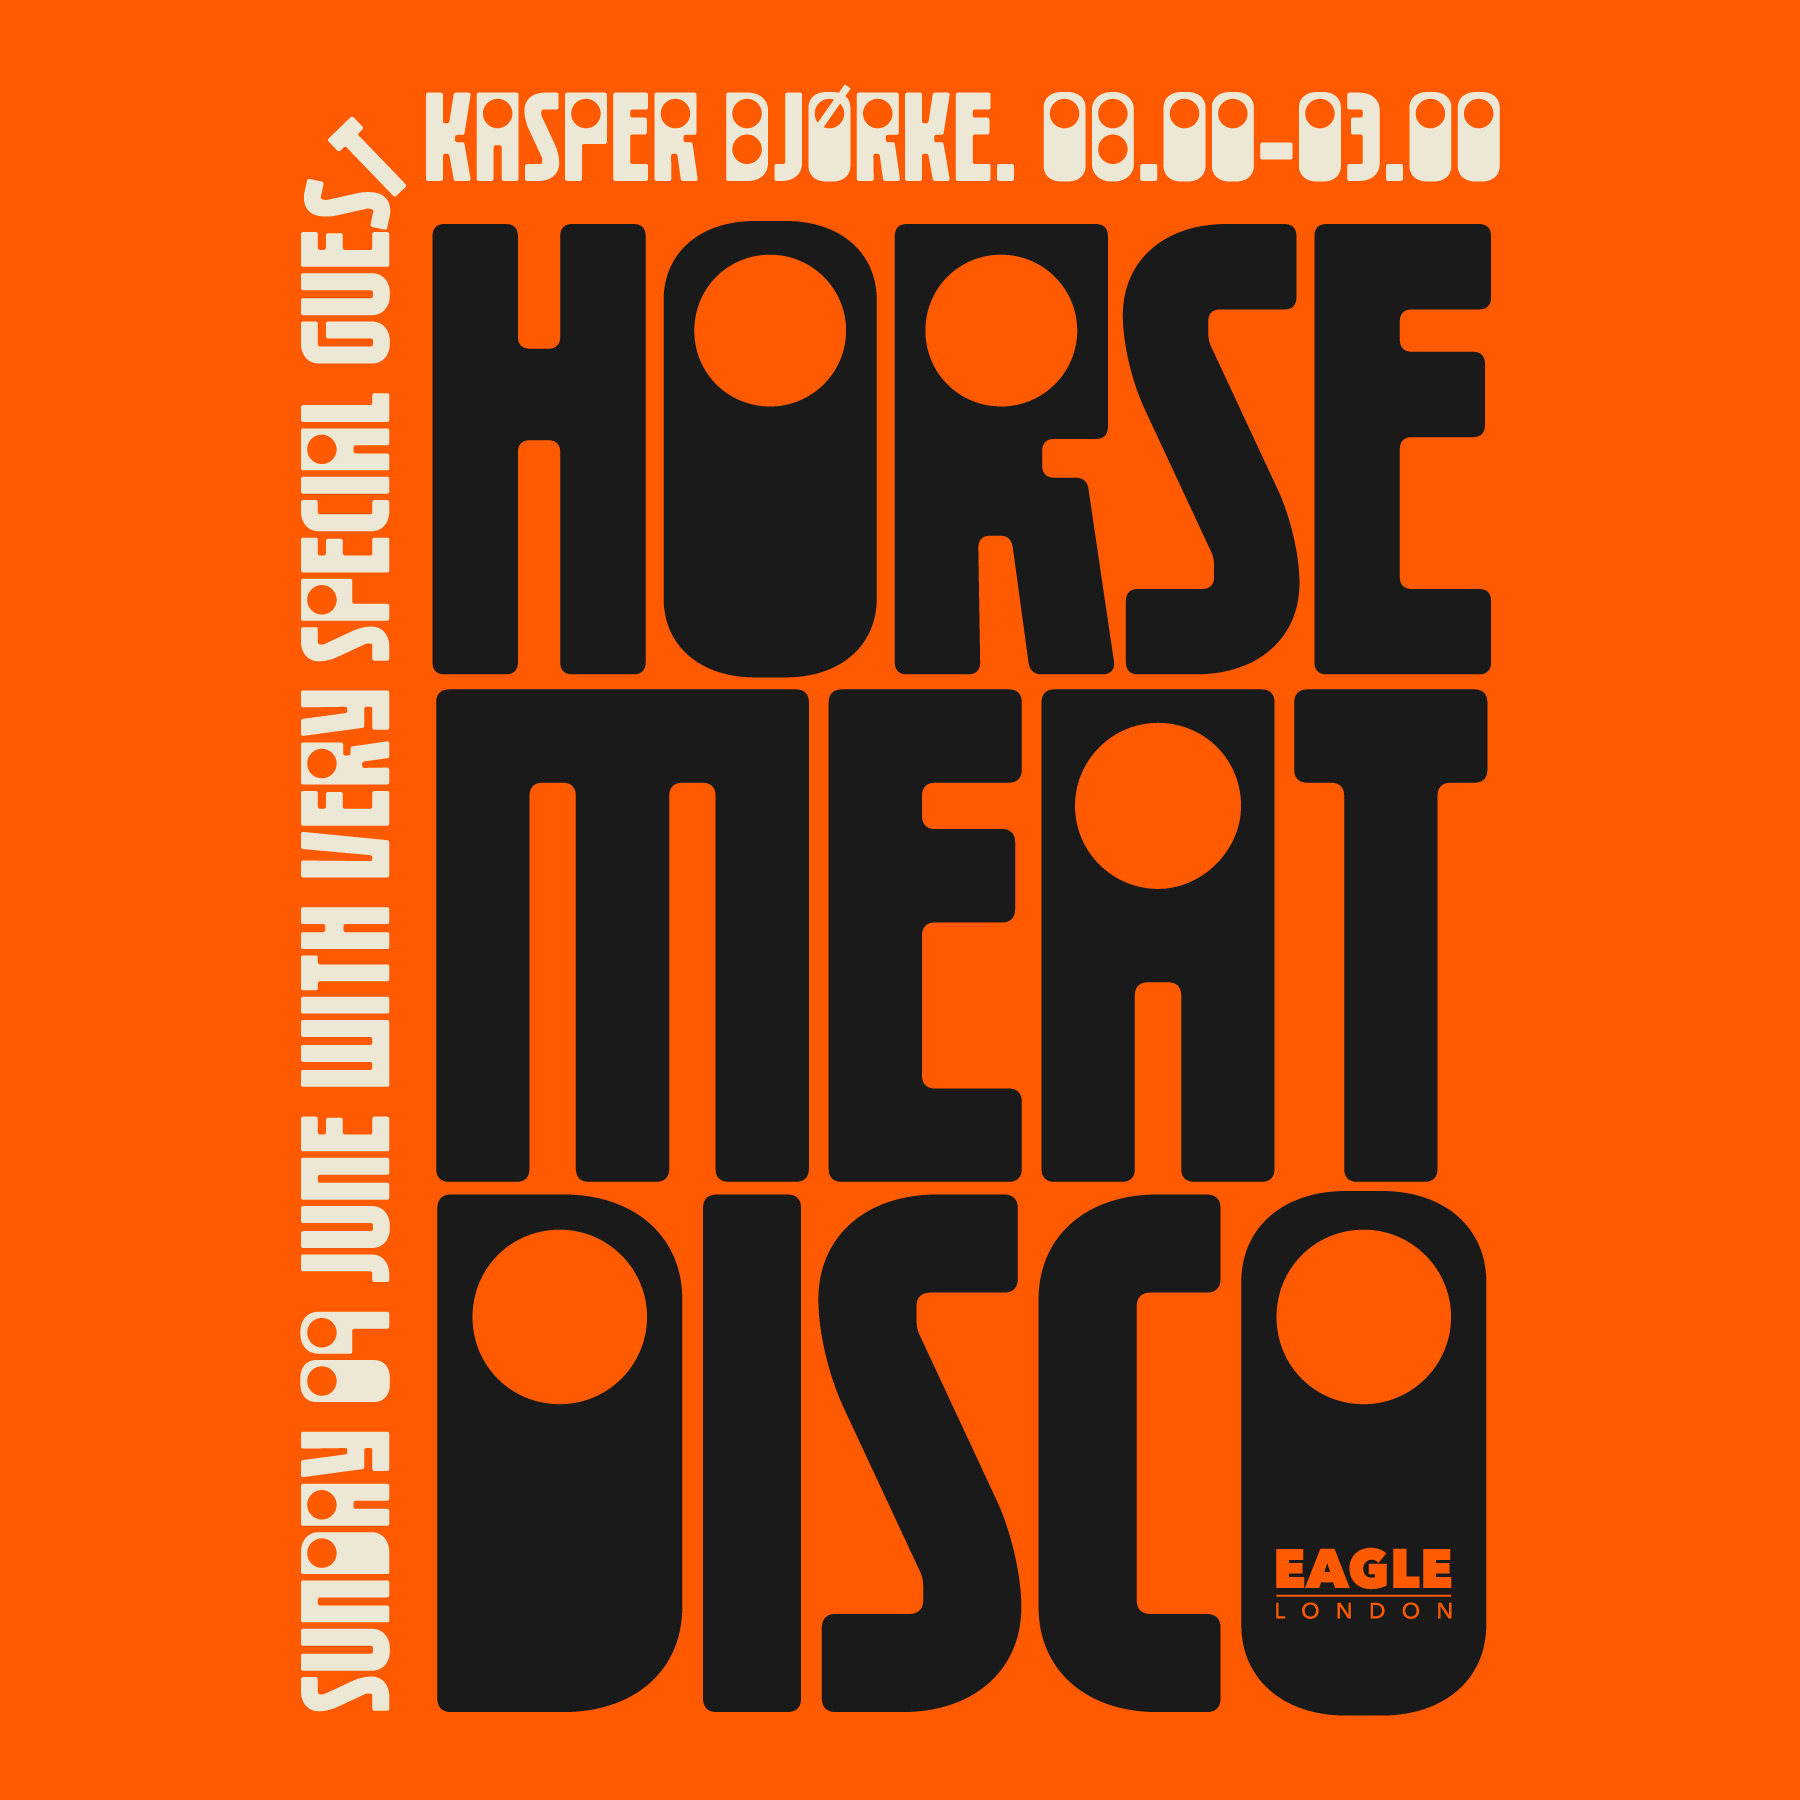 Horse Meat Disco - The Legendary Sunday Night Discotheque - Página frontal